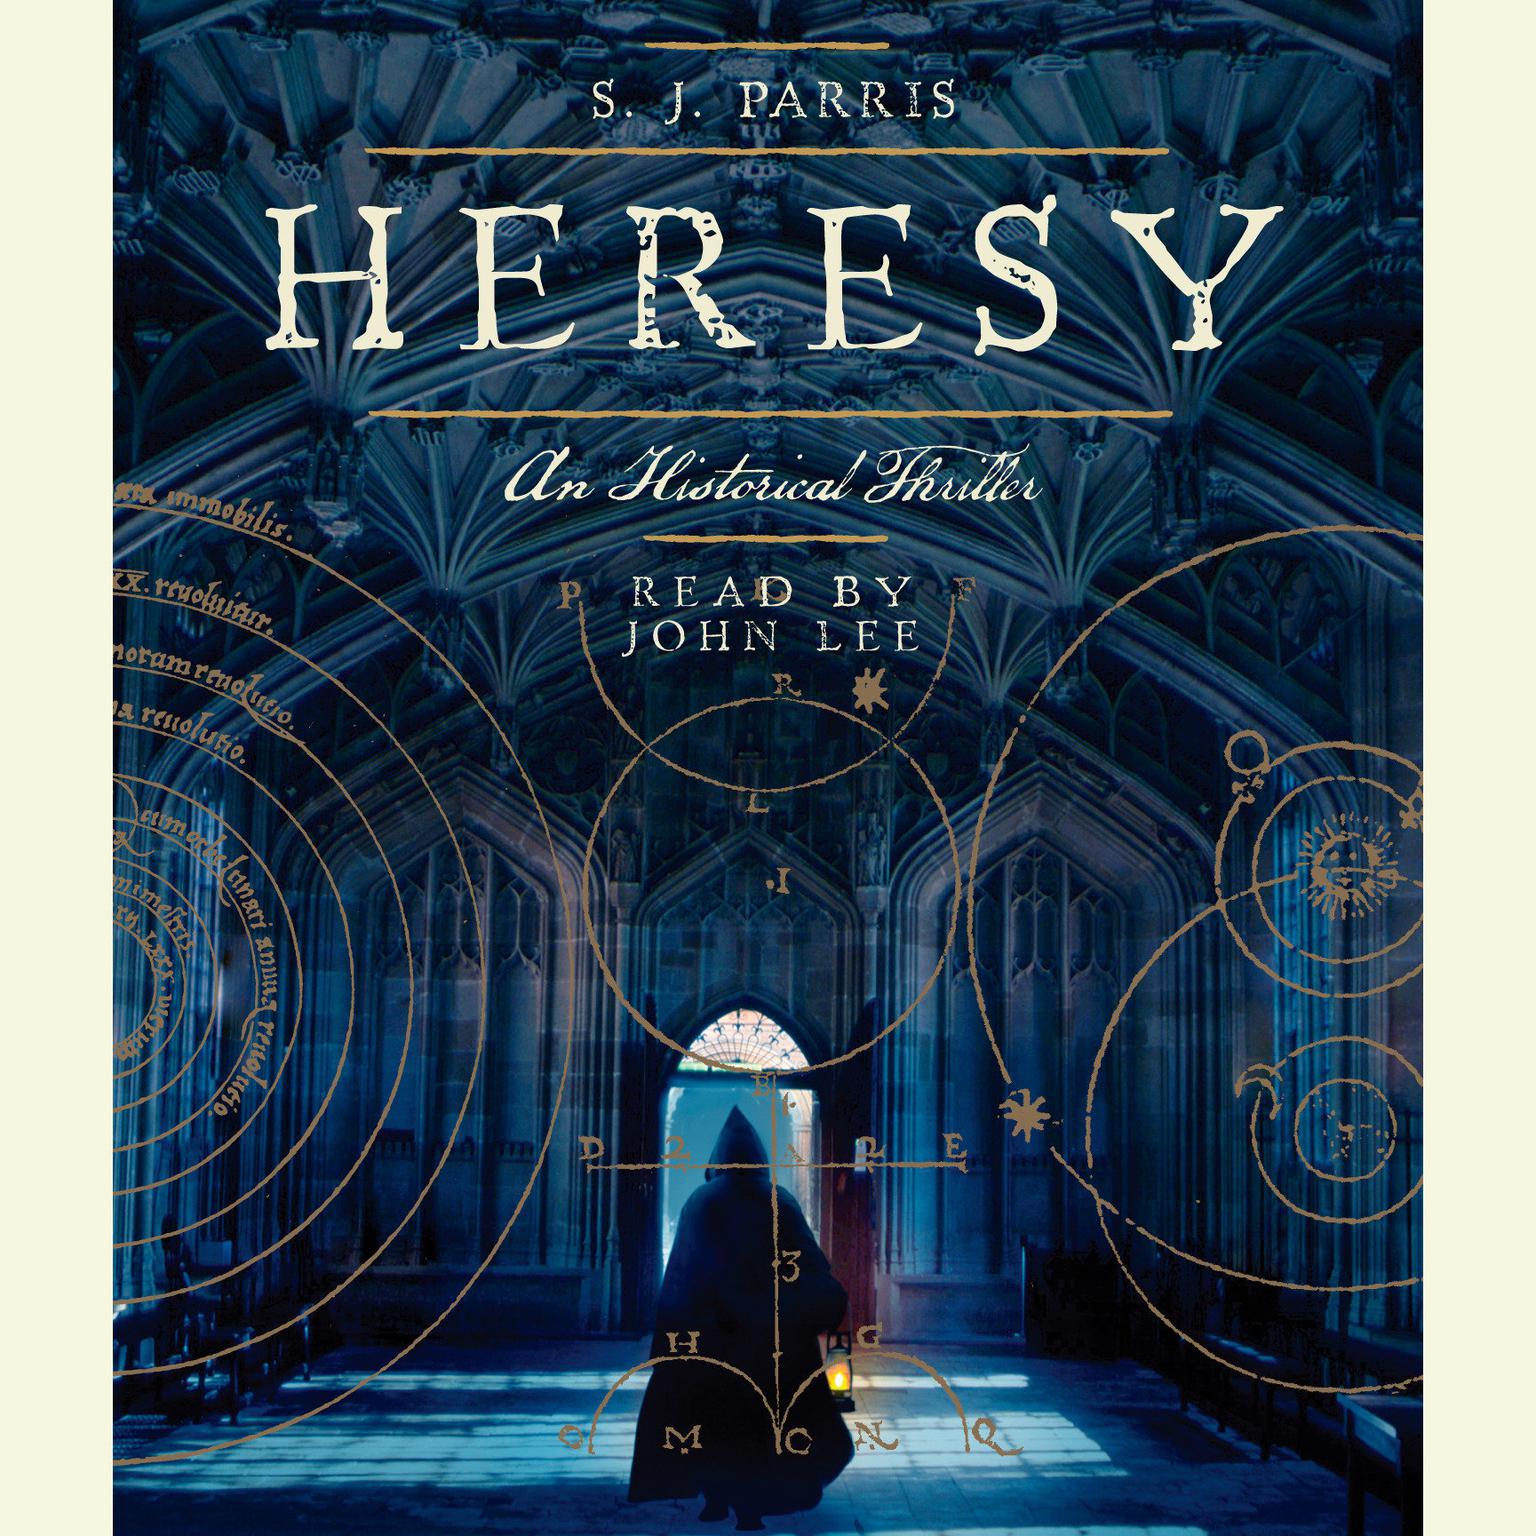 Heresy (Abridged) Audiobook, by S. J. Parris